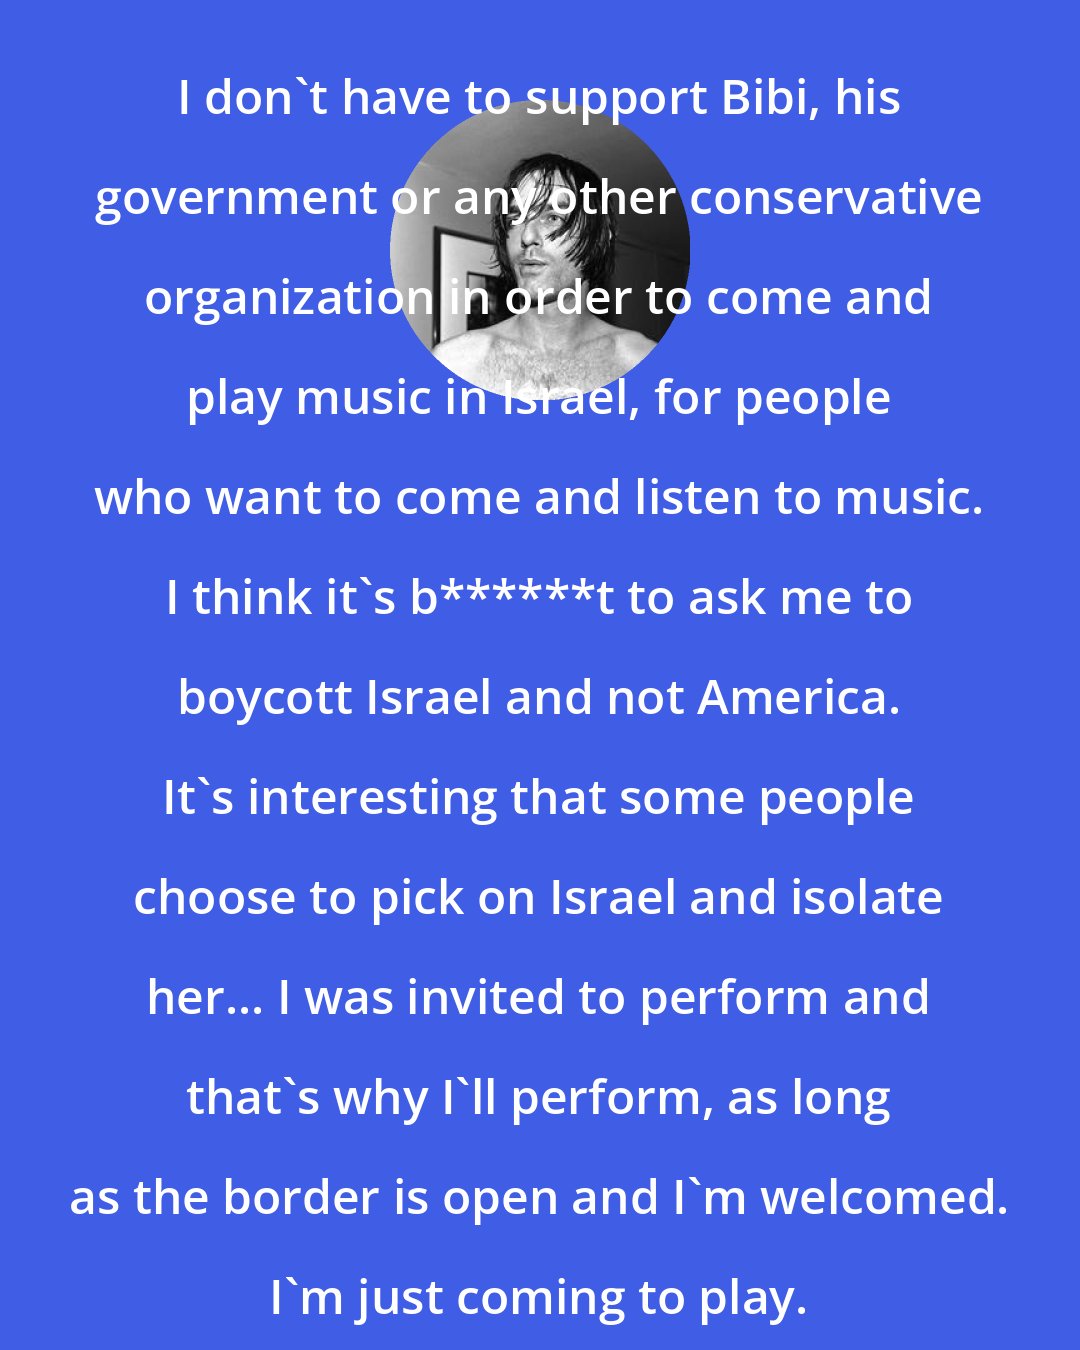 Anton Newcombe: I don't have to support Bibi, his government or any other conservative organization in order to come and play music in Israel, for people who want to come and listen to music. I think it's b******t to ask me to boycott Israel and not America. It's interesting that some people choose to pick on Israel and isolate her... I was invited to perform and that's why I'll perform, as long as the border is open and I'm welcomed. I'm just coming to play.